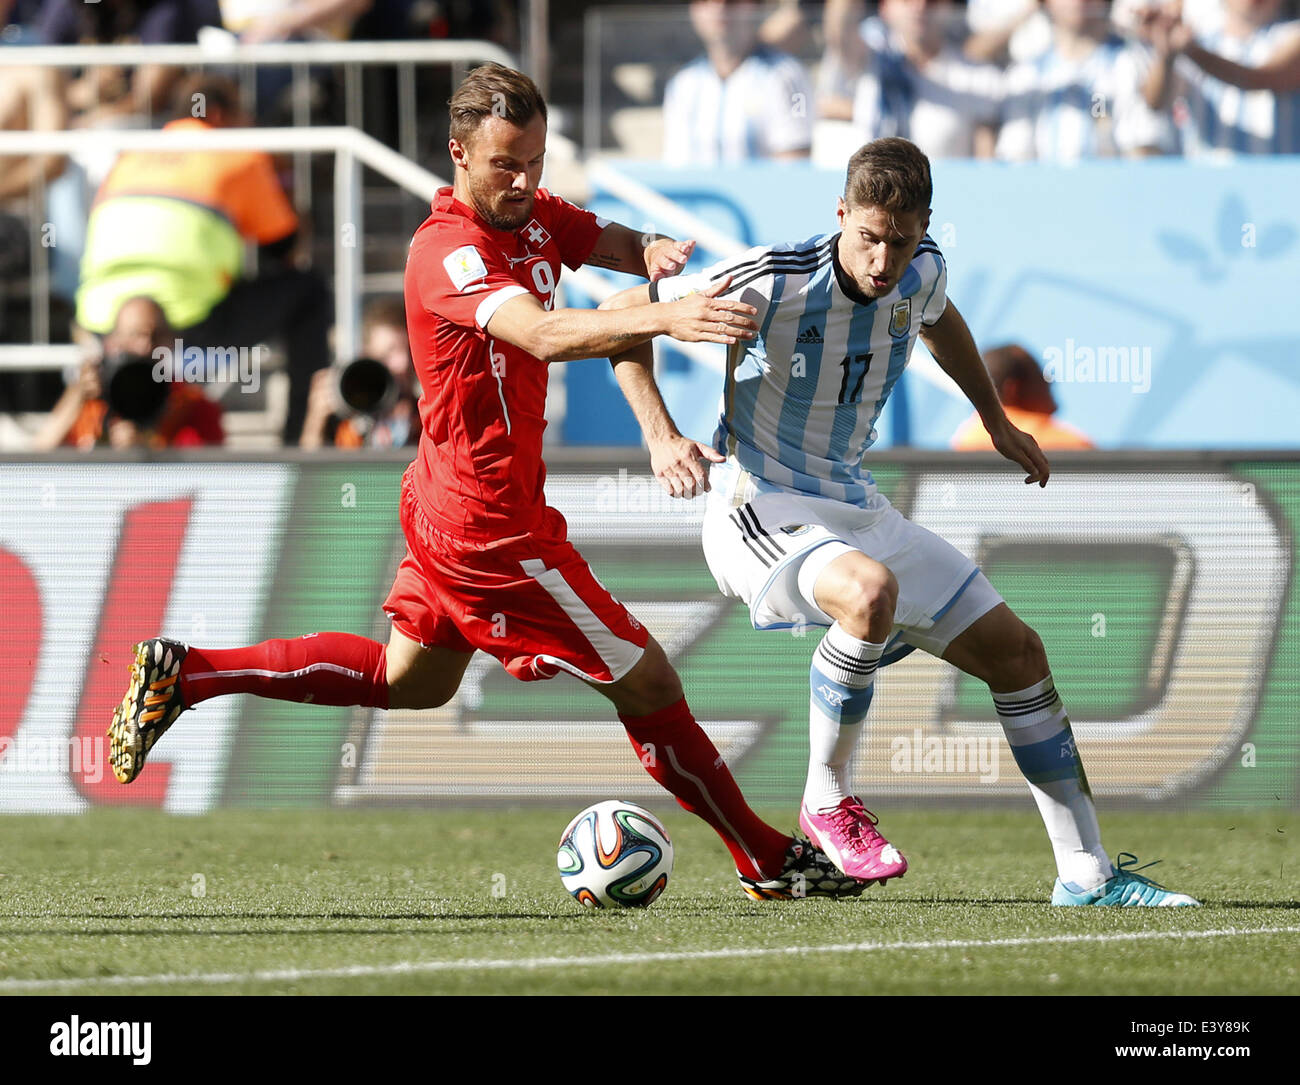 Sao Paulo, Brazil. 1st July, 2014. Switzerland's Haris Seferovic (L) vies with Argentina's Federico Fernandez during a Round of 16 match between Argentina and Switzerland of 2014 FIFA World Cup at the Arena de Sao Paulo Stadium in Sao Paulo, Brazil, on July 1, 2014. Credit:  Wang Lili/Xinhua/Alamy Live News Stock Photo